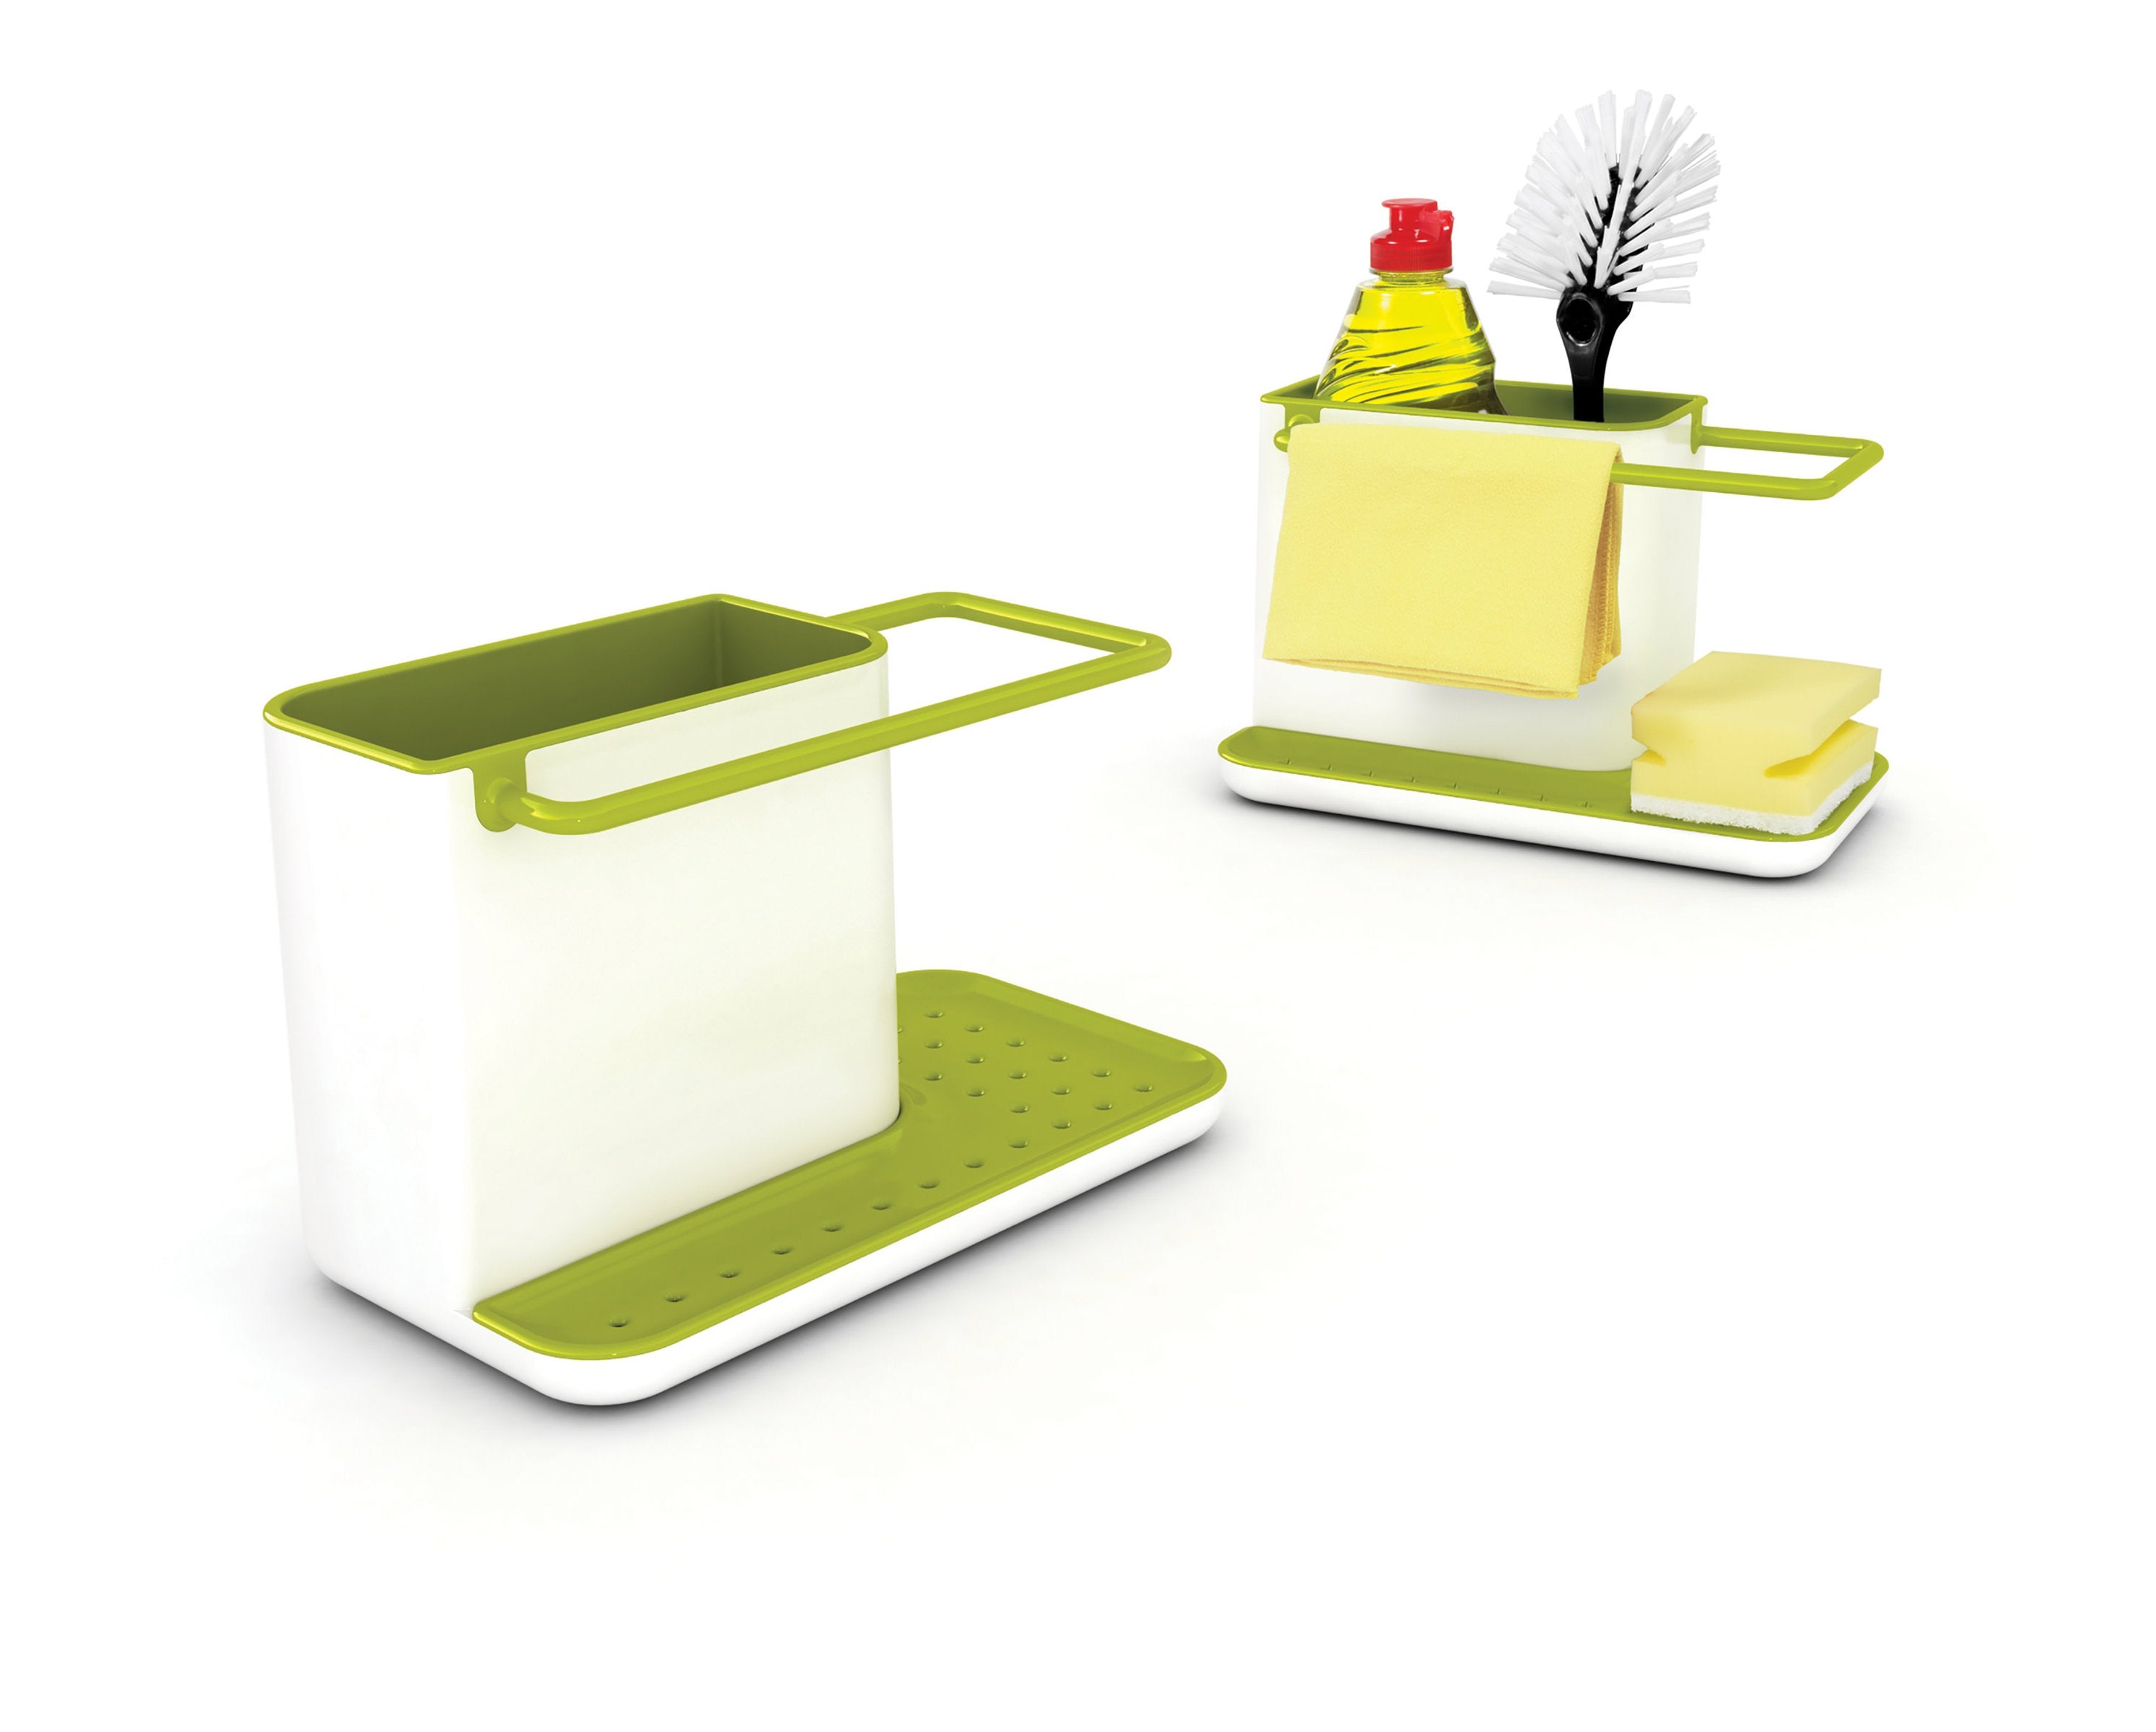 BEON.COM.AU  This kitchen sink caddy offers plenty of space to store your washing-up liquid bottle and brush, plus the rail also allows you to hang and dry damp dishcloths.  Organised storage for your sink area Main compartment for storing large washing up liquid bottle and brush Rail for hanging damp dishcl... Joseph Joseph at BEON.COM.AU